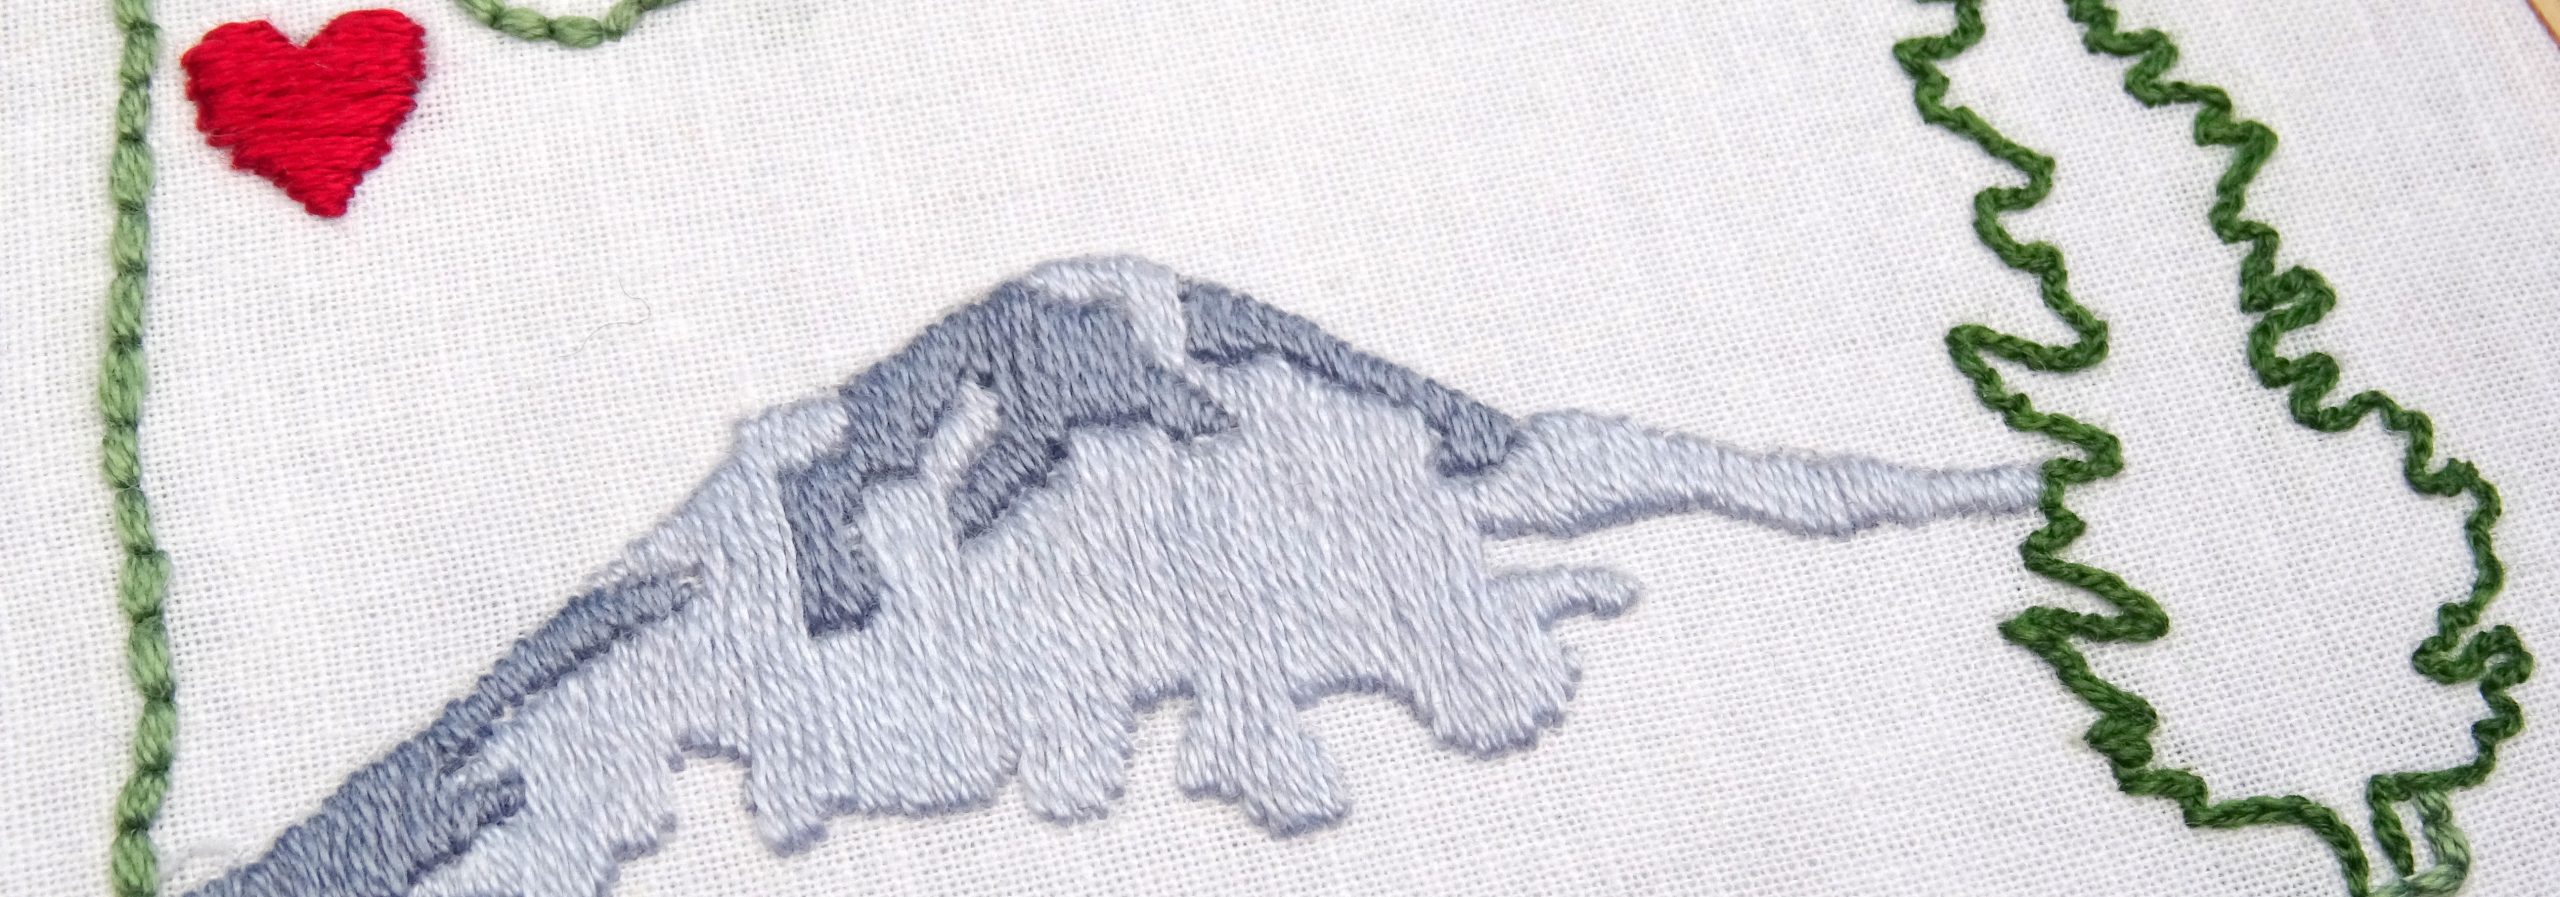 Oregon State Embroidery Pattern